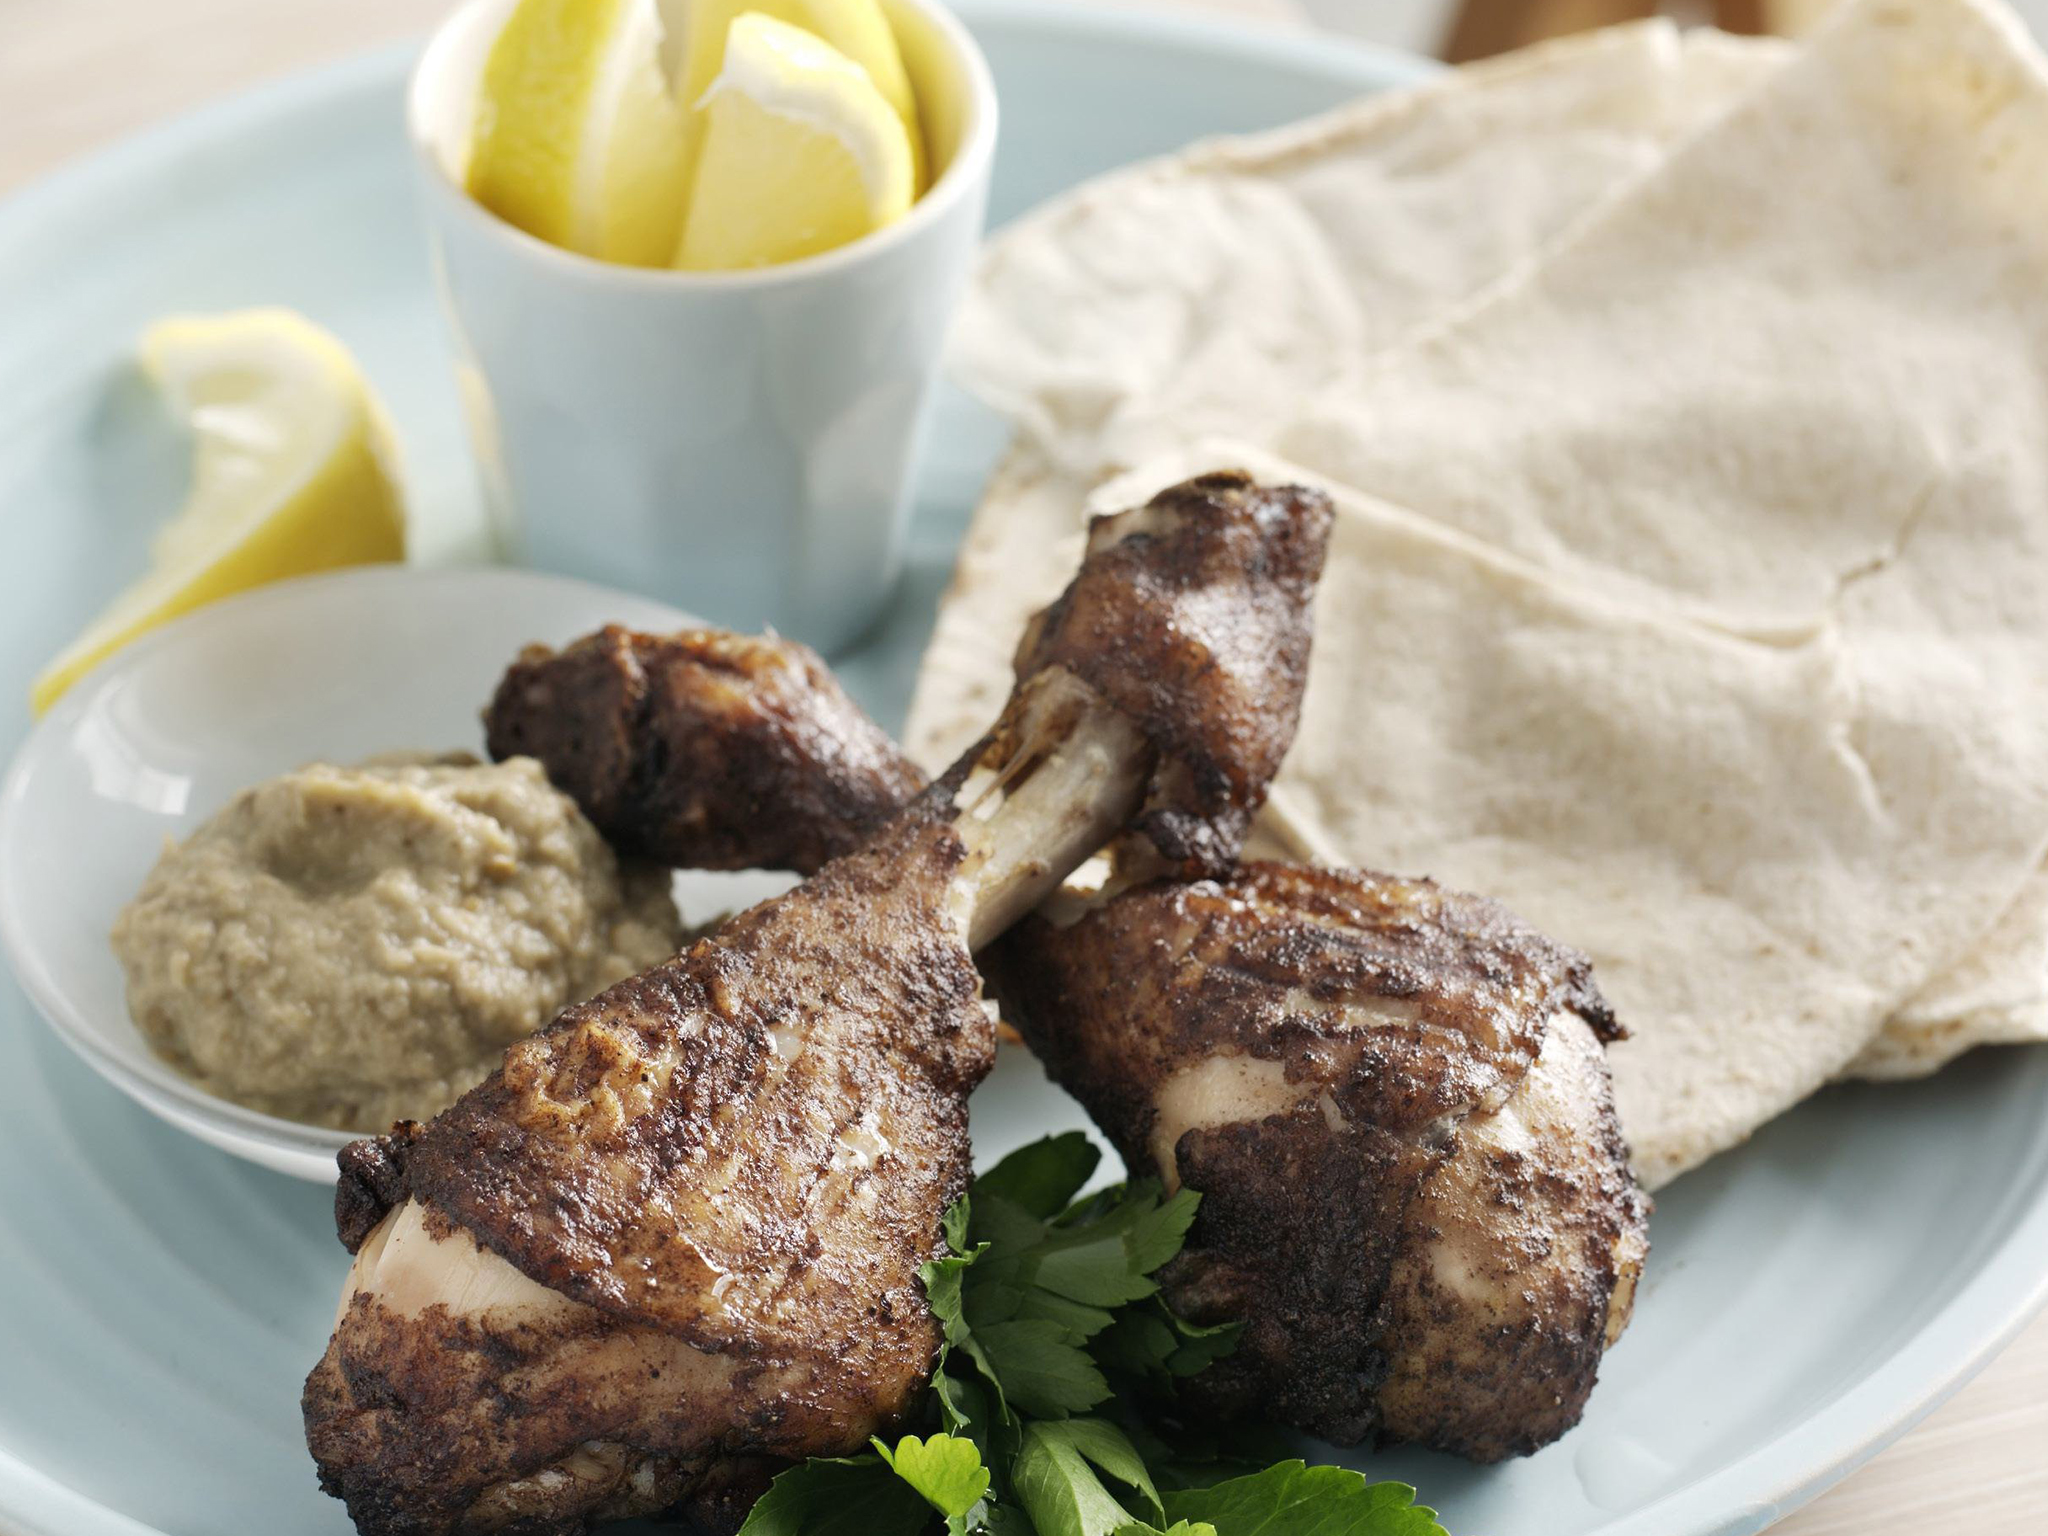 lebanese-spiced drumsticks with baba ghanoush